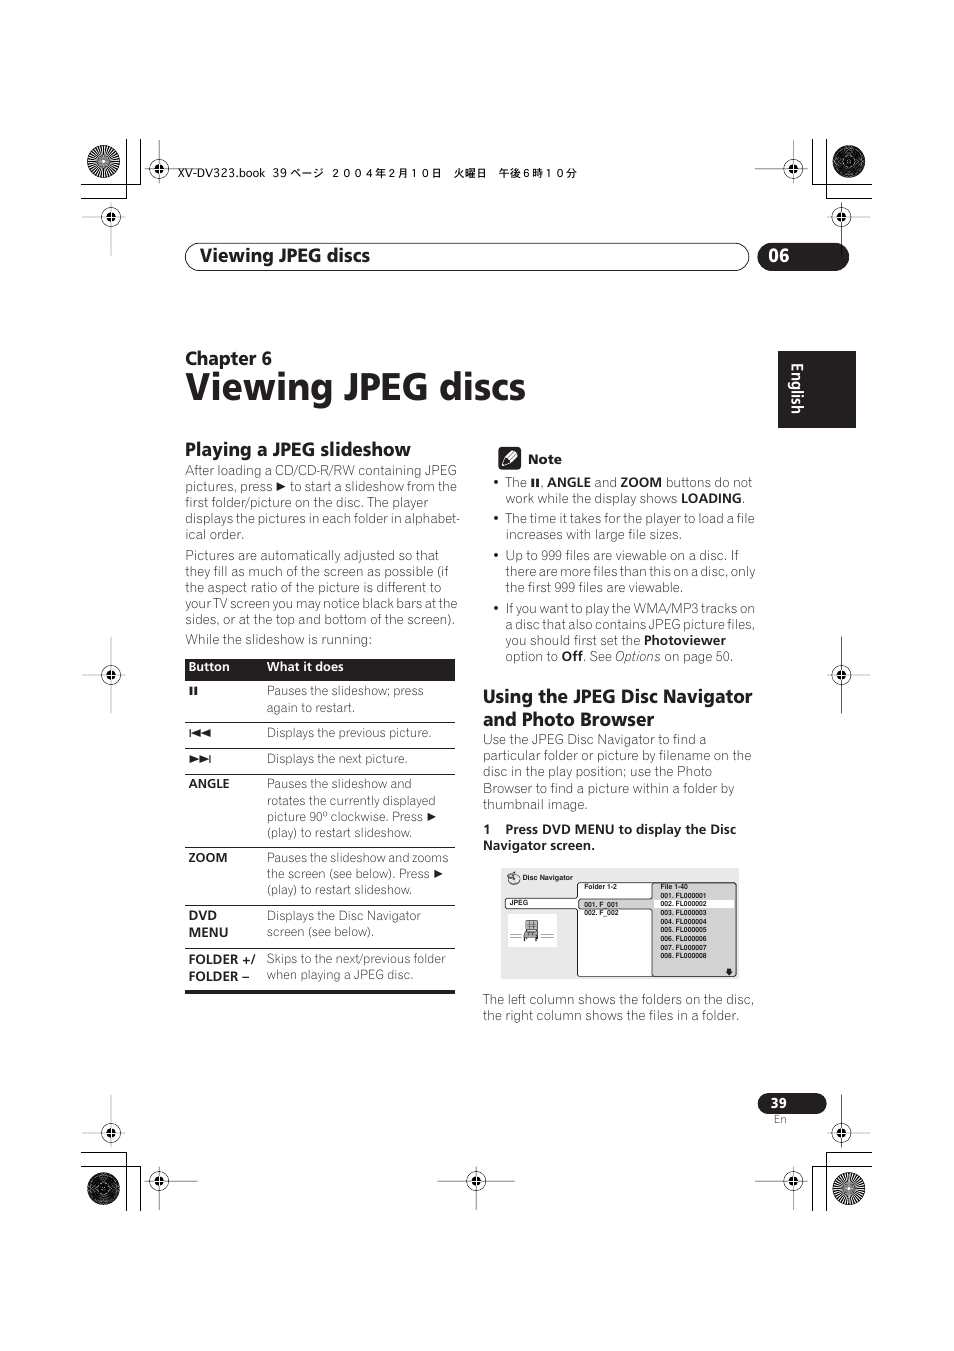 06 viewing jpeg discs, Playing a jpeg slideshow, Using the jpeg disc navigator and photo browser | Viewing jpeg discs, Viewing jpeg discs 06, Chapter 6 | Pioneer S-DV440 User Manual | Page 39 / 74